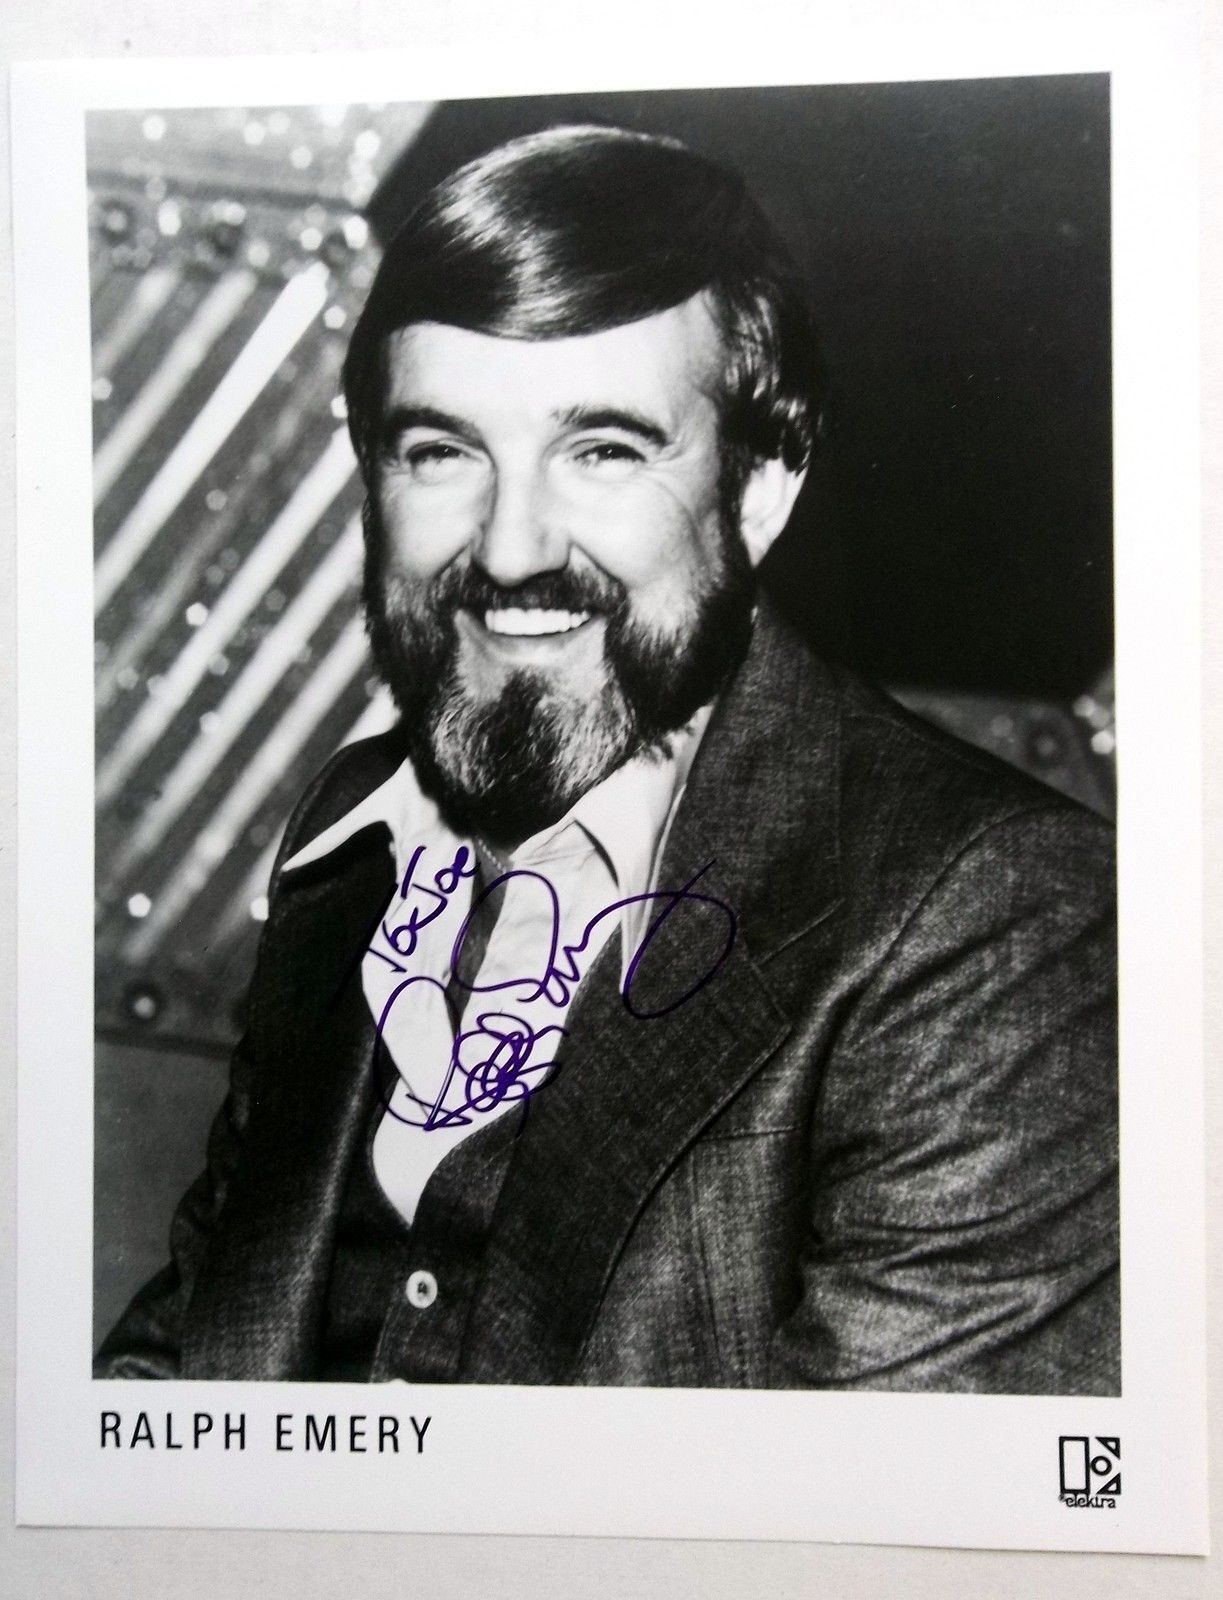 RALPH EMERY Autographed 8 x 10 promo Photo Poster painting 70's COUNTRY Disk Jockey HOST